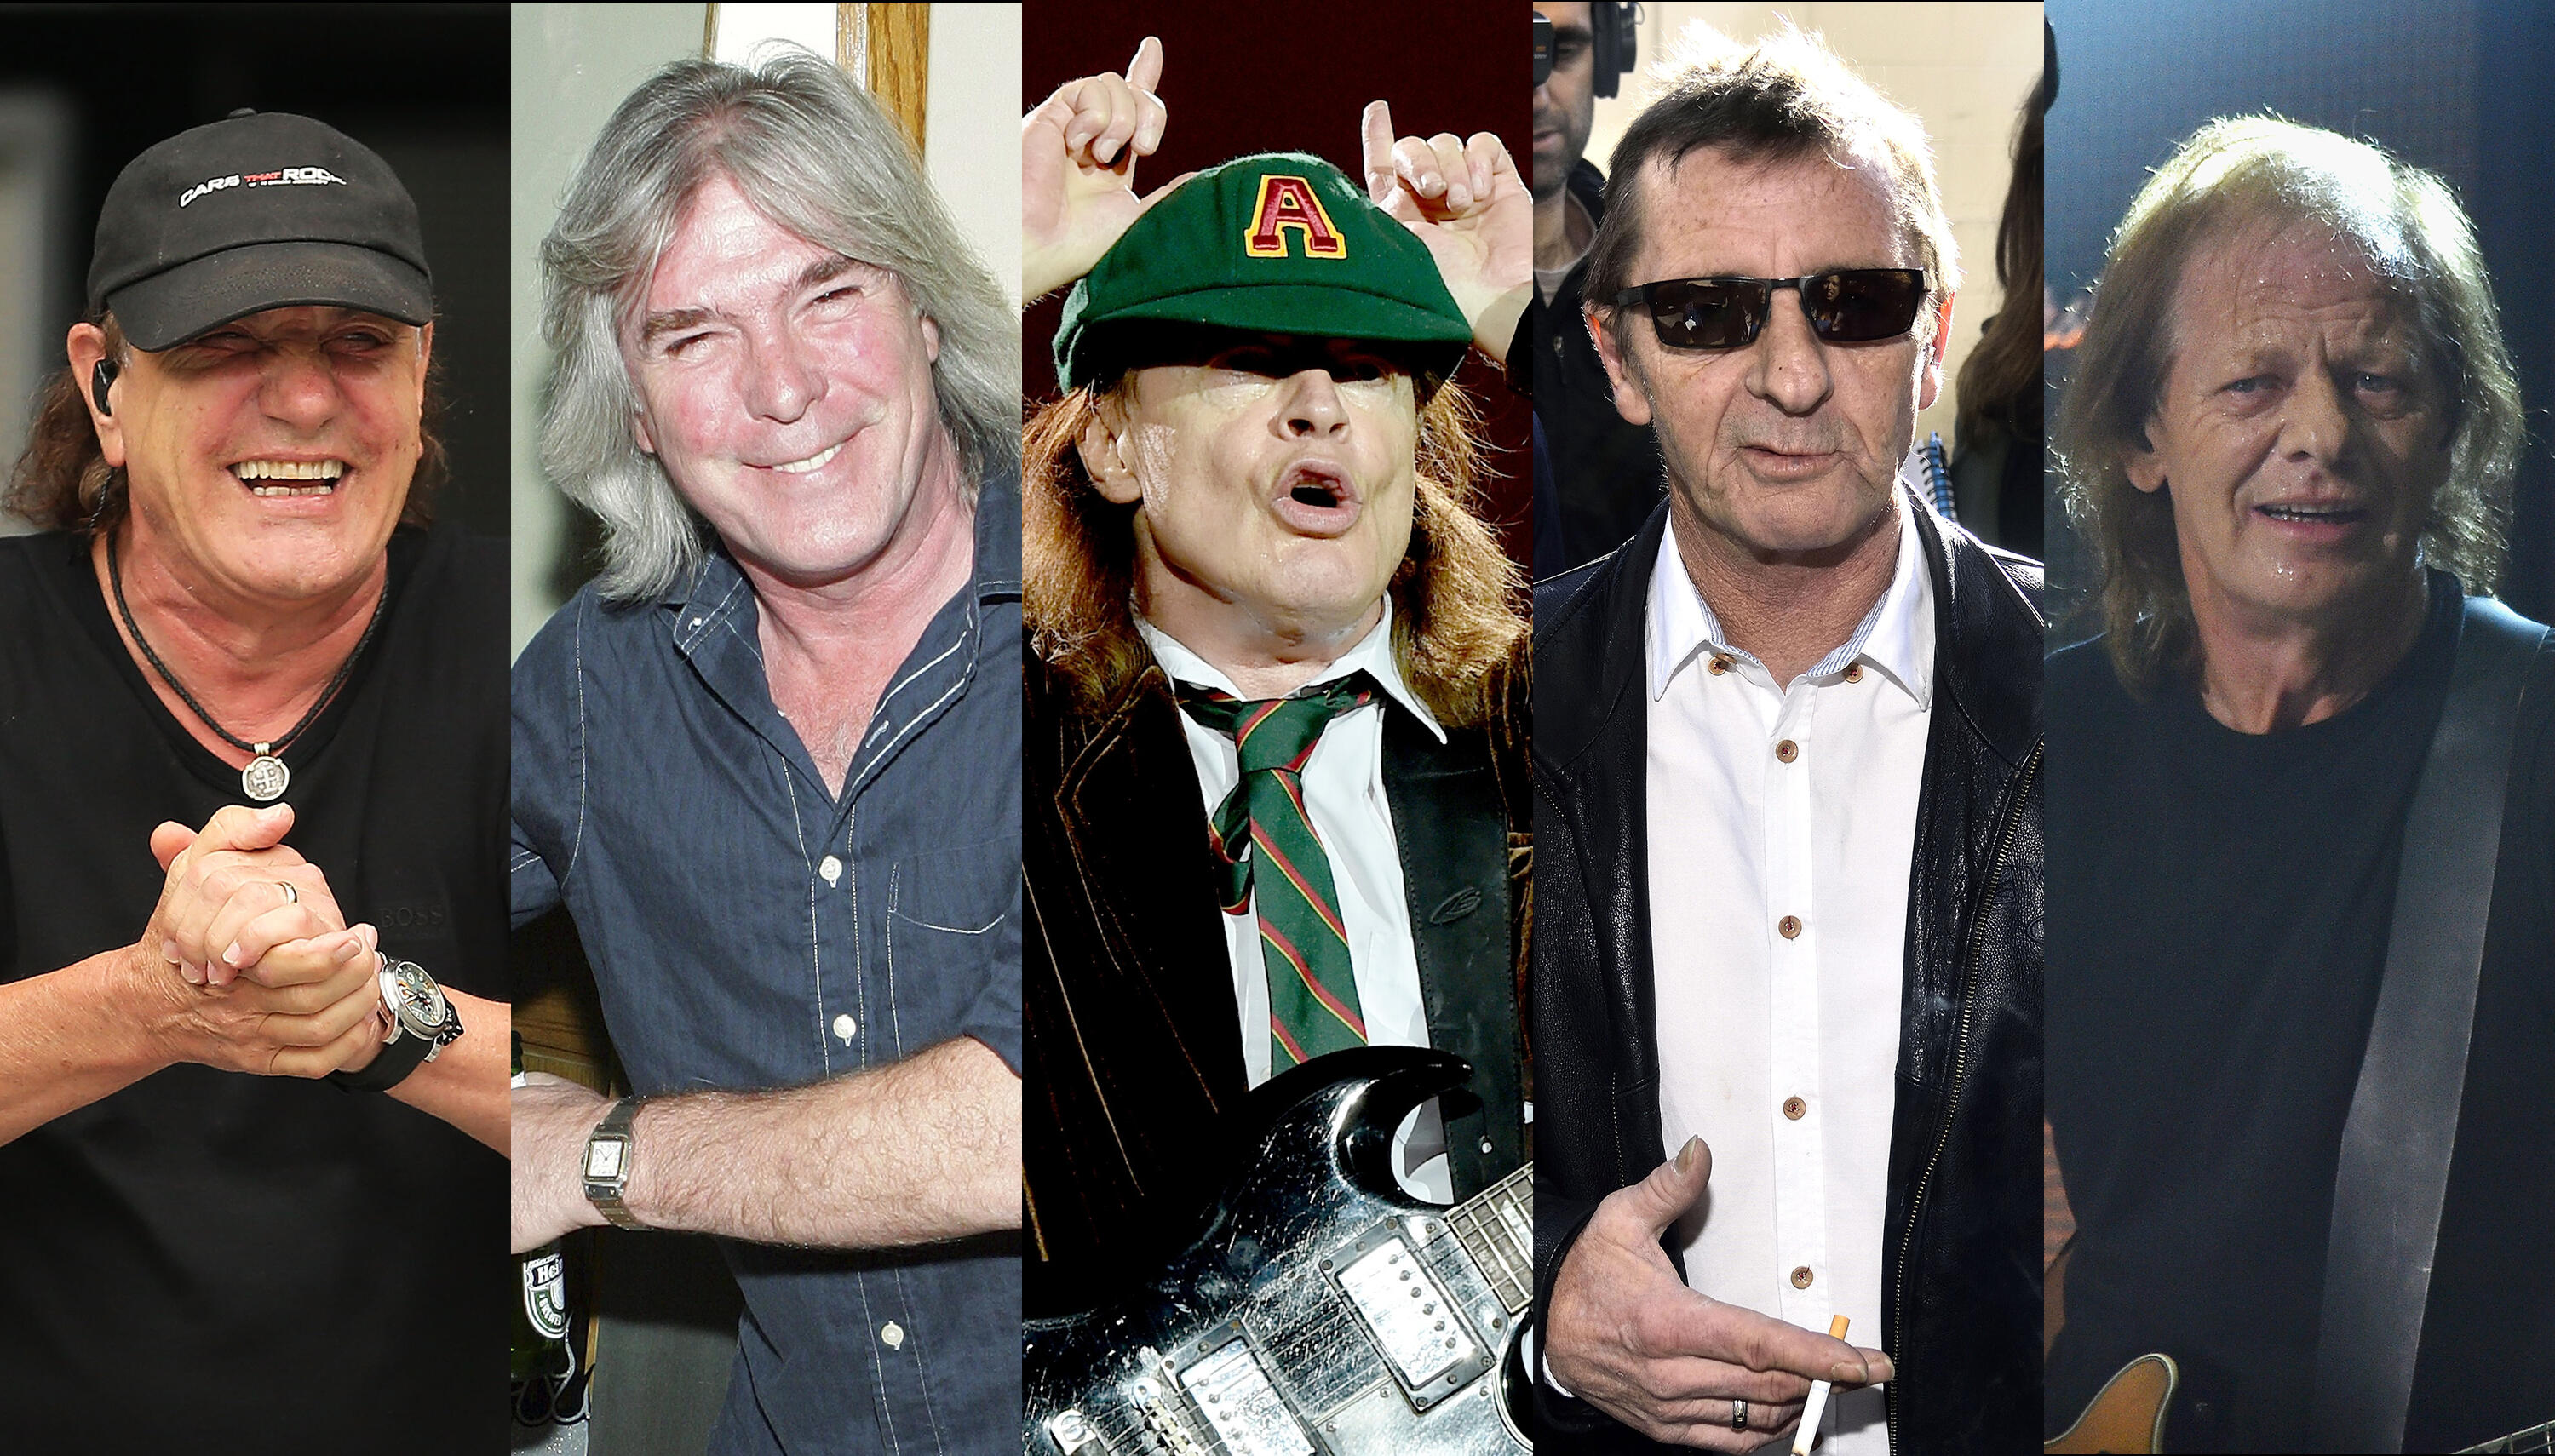 AC/DC Confirms Latest Lineup With New Photo, Asks If Fans Are 'Ready